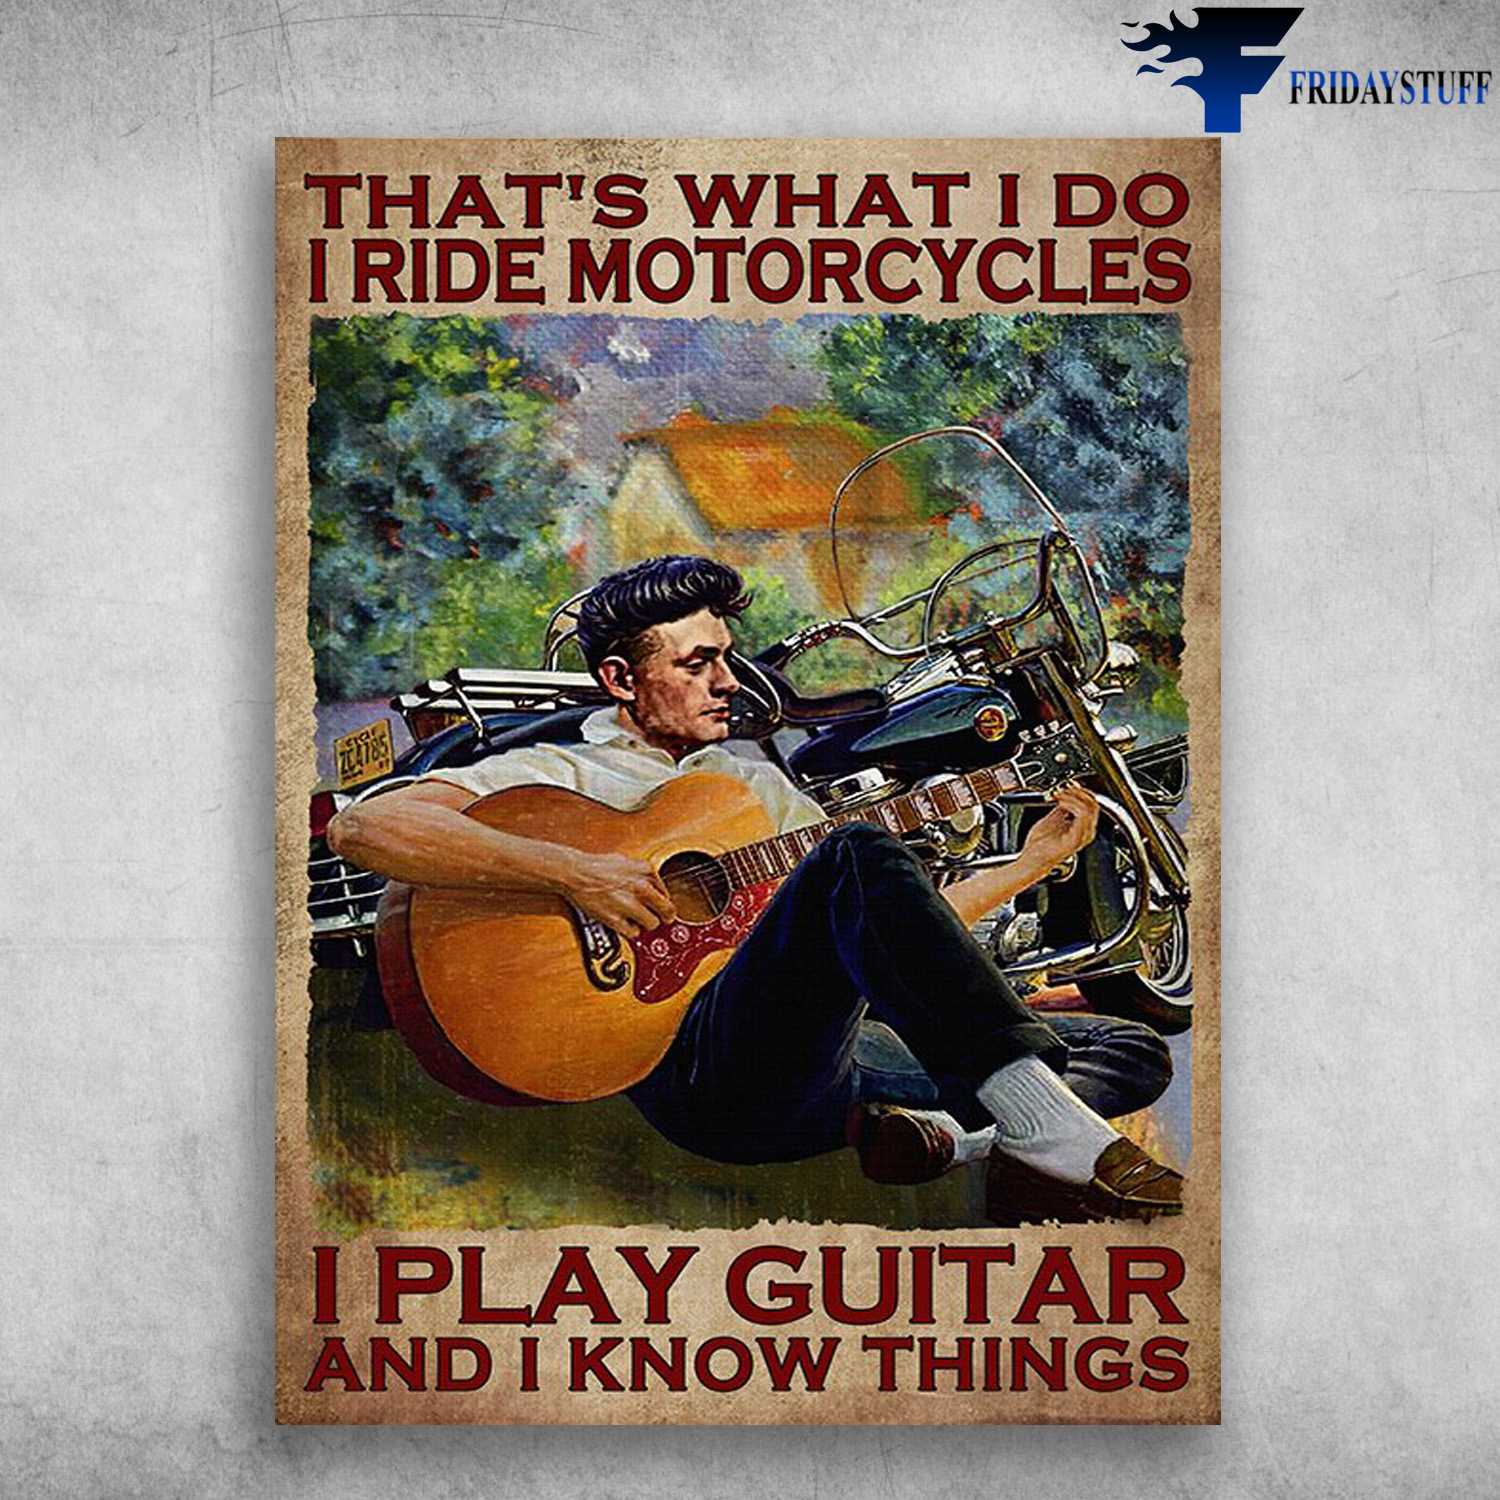 Guitar Motorcycle - That's What I Do, I Ride Motorcycles, I Play Guitar, And I Know Things